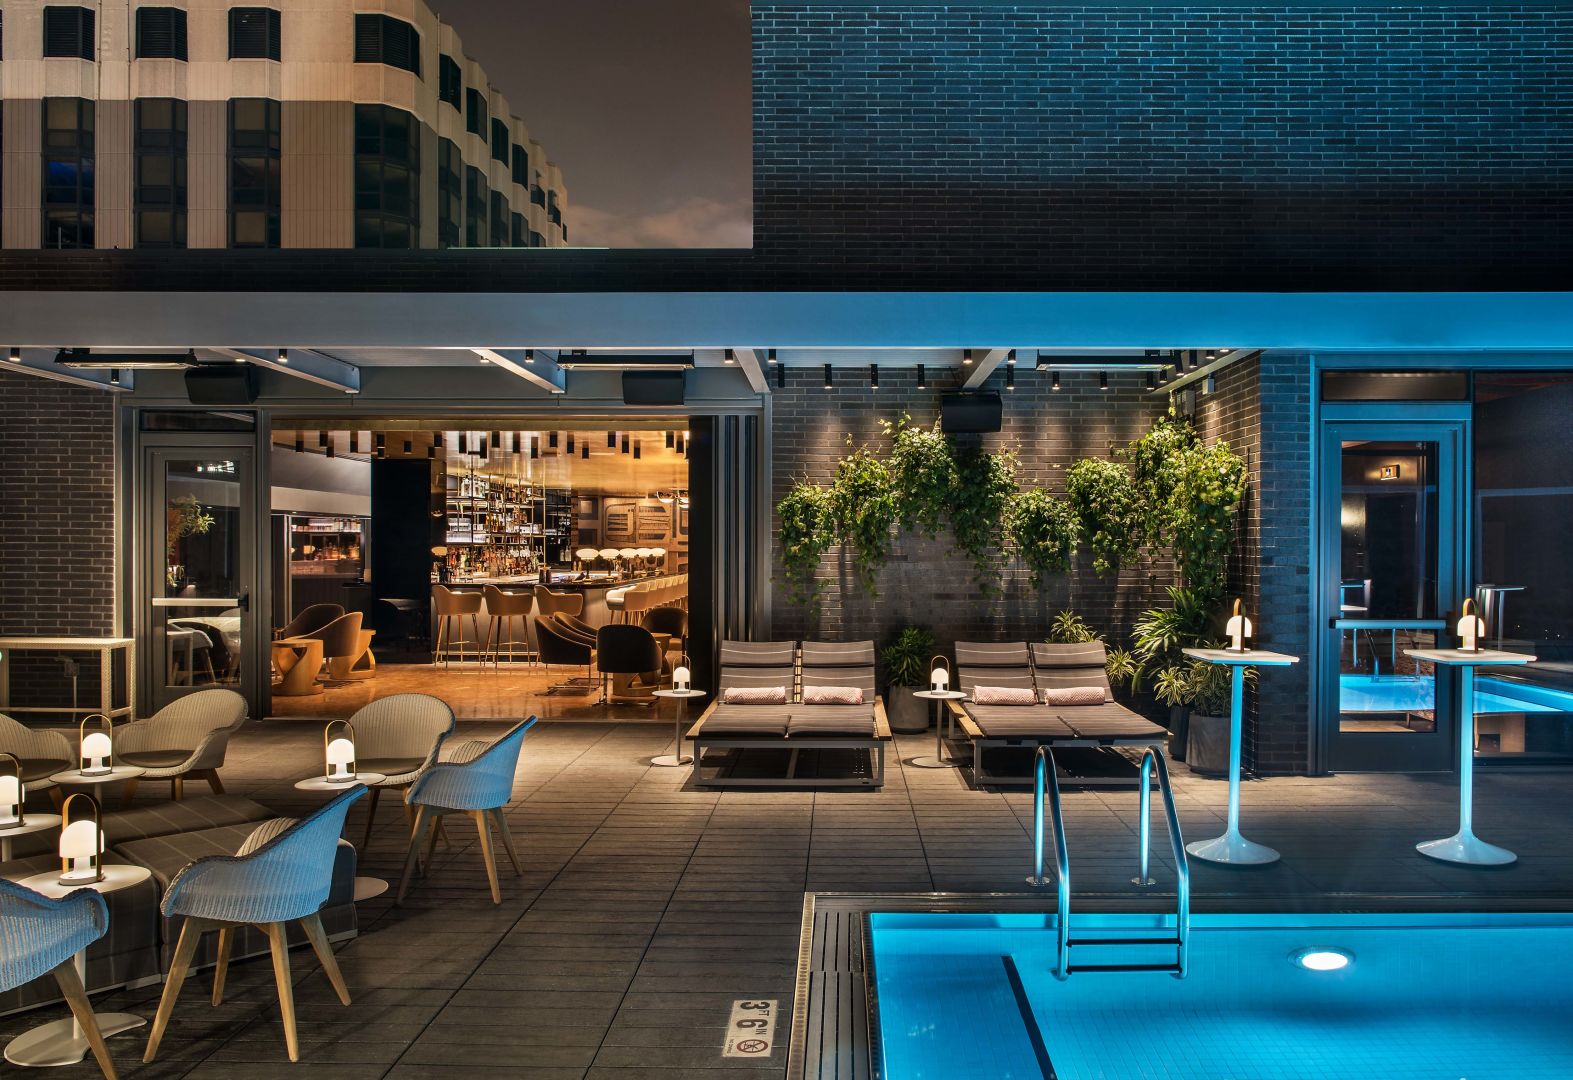 Viceroy hotel rooftop lounge at night